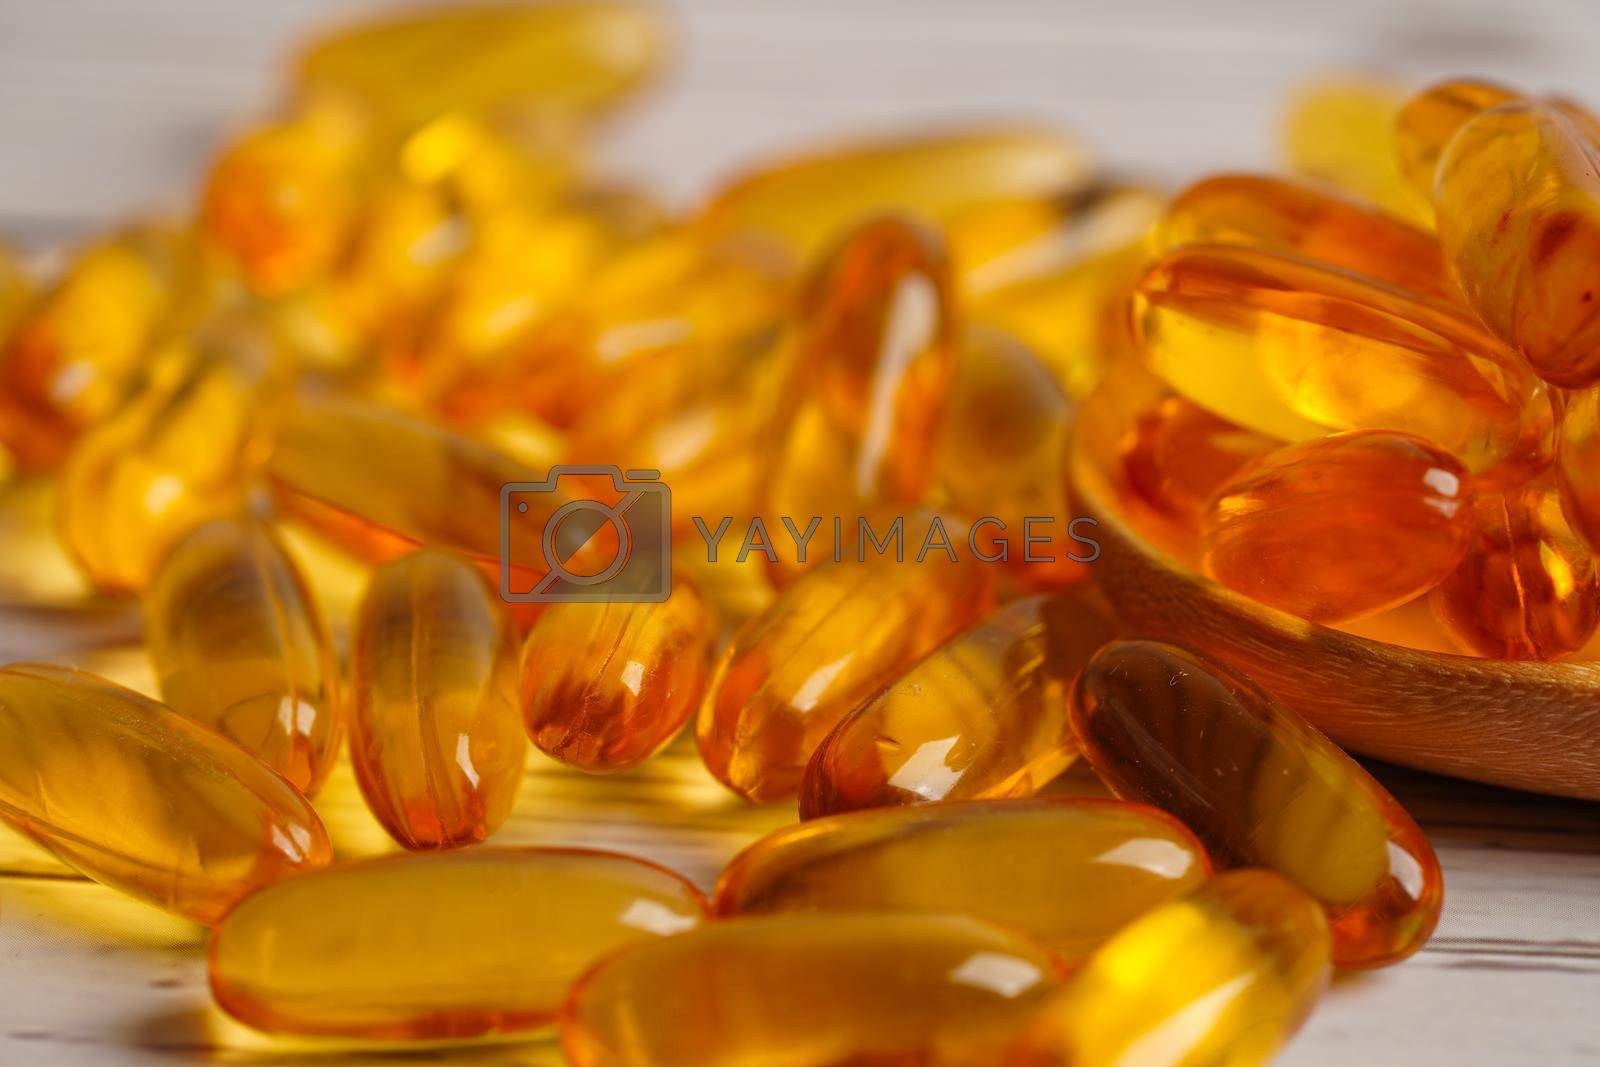 Royalty free image of Fish oil or Cod liver oil gel in capsules with omega 3 vitamins, supplementary healthy food  by sweettomato